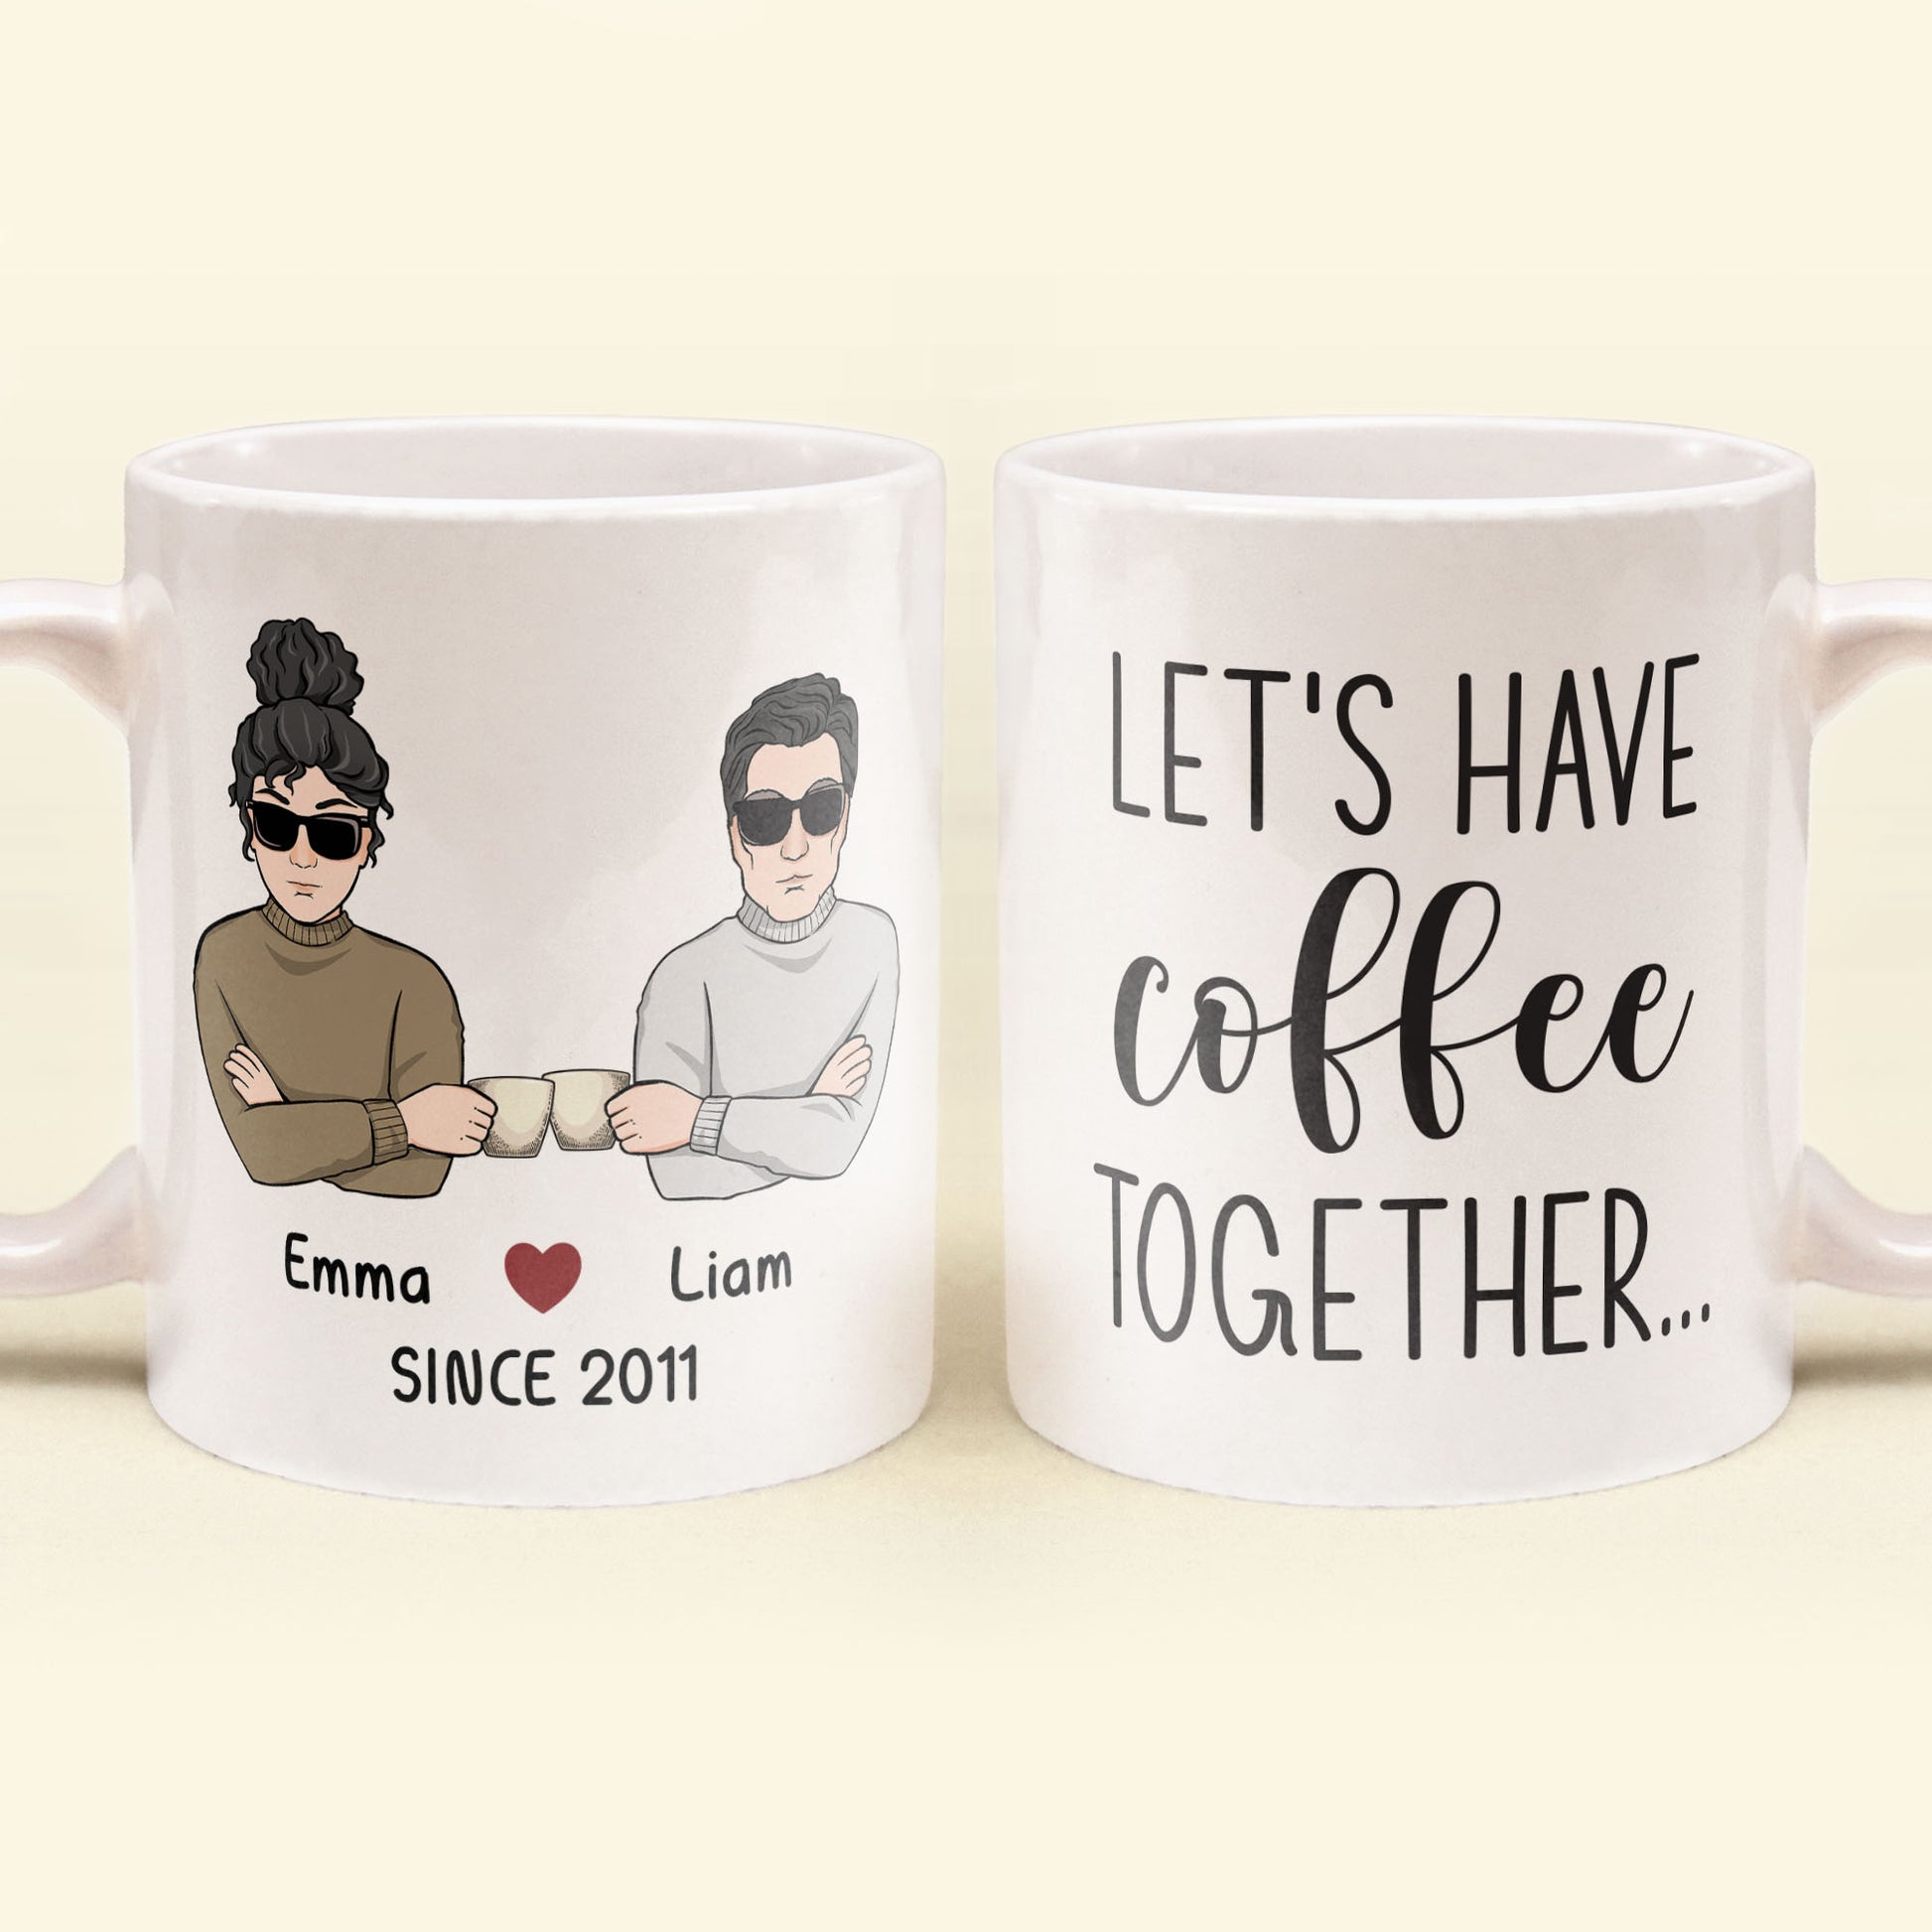 Personalized And Together They Built A Life They Loved Carl and Ellie  Couple Coffee Mugs